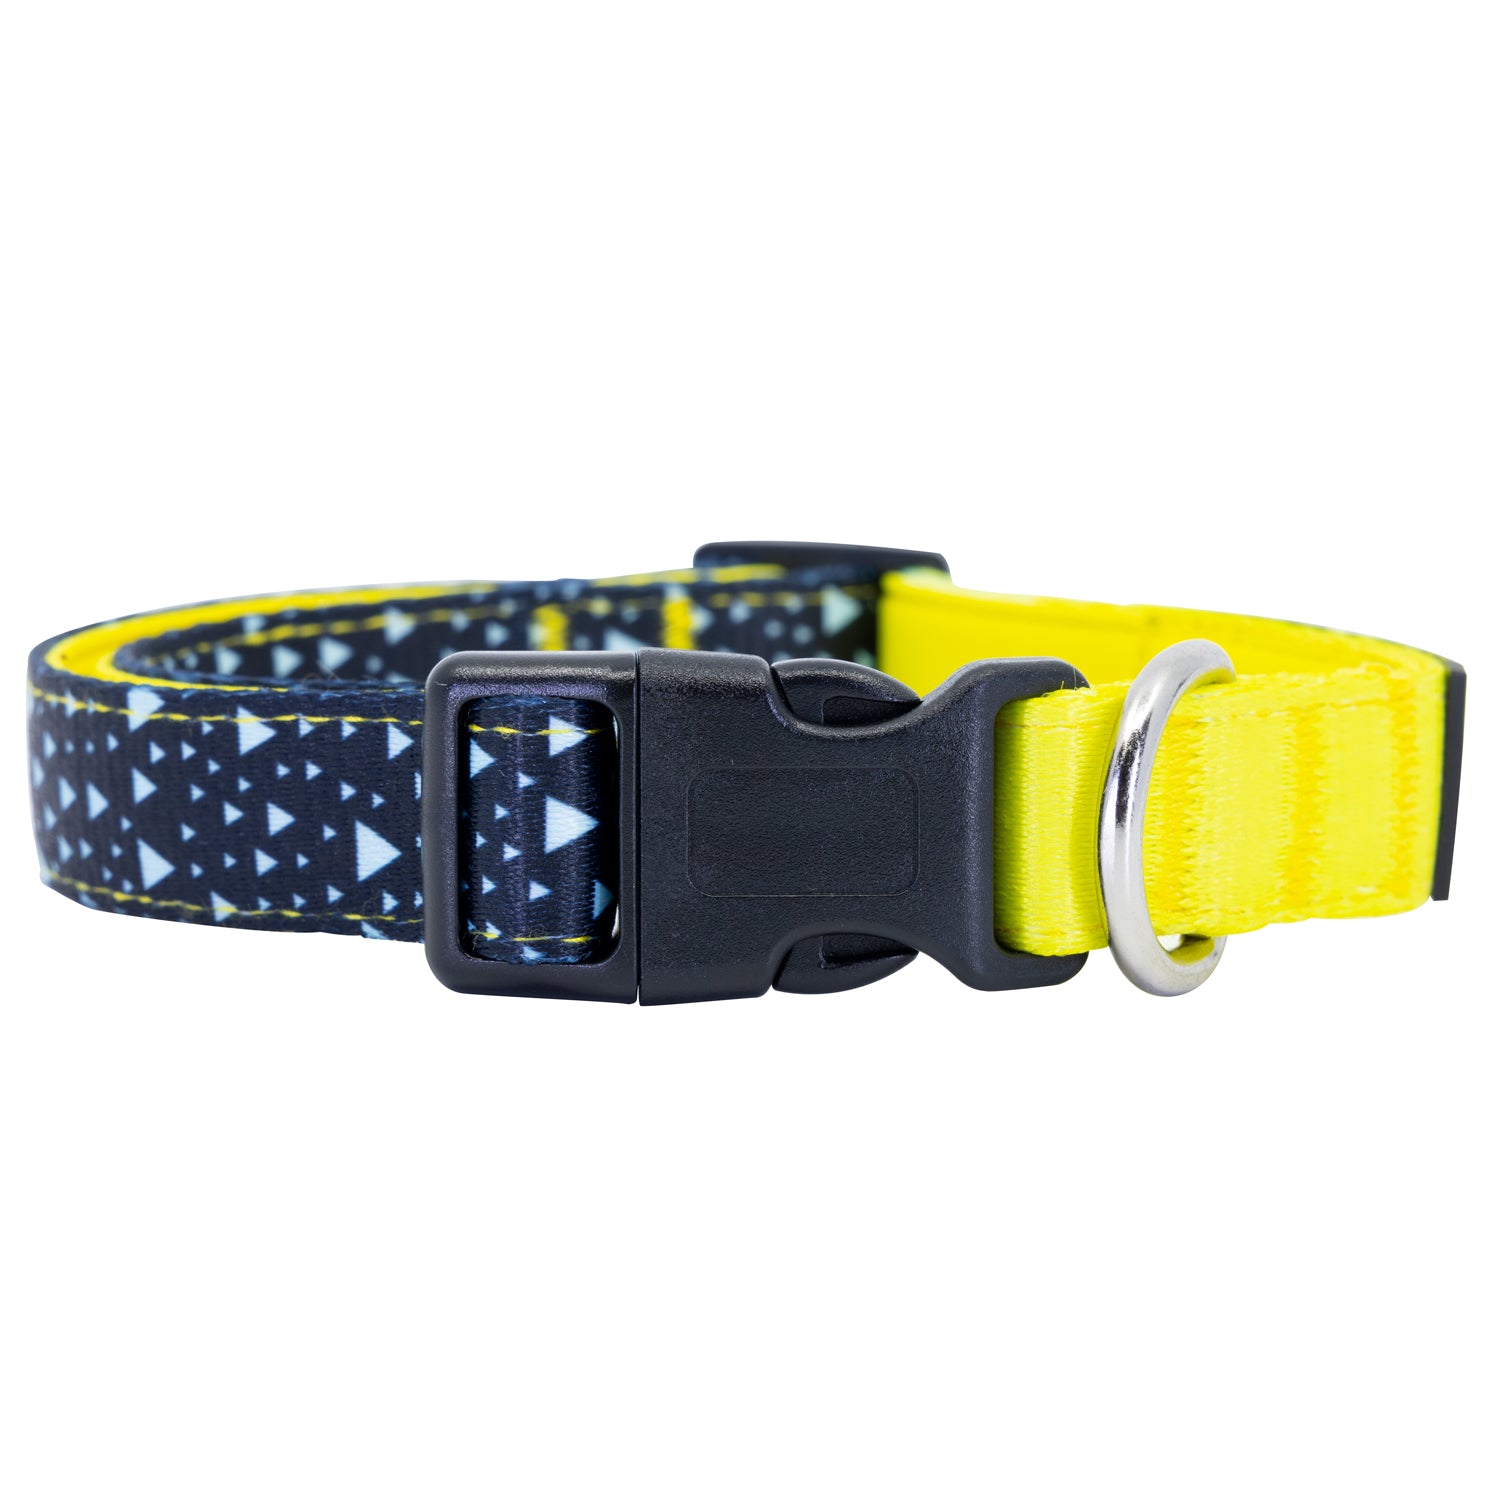 Asteroid Blues Dog Collar Buckle and D-Ring Product Shot